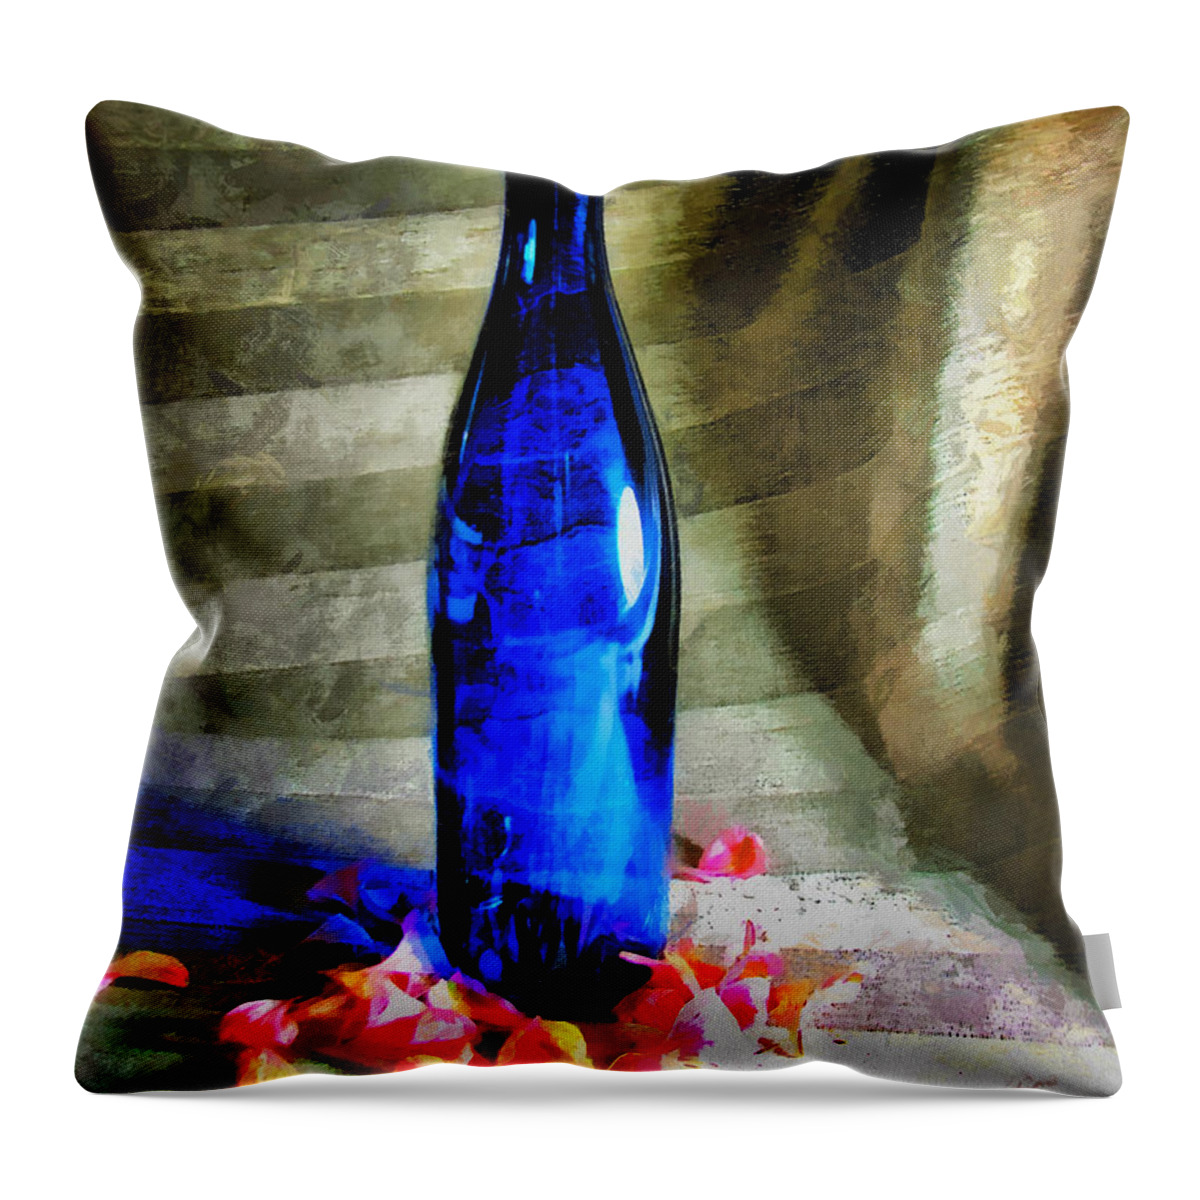 Bottle Throw Pillow featuring the photograph Blue Wine Bottle by Todd Blanchard